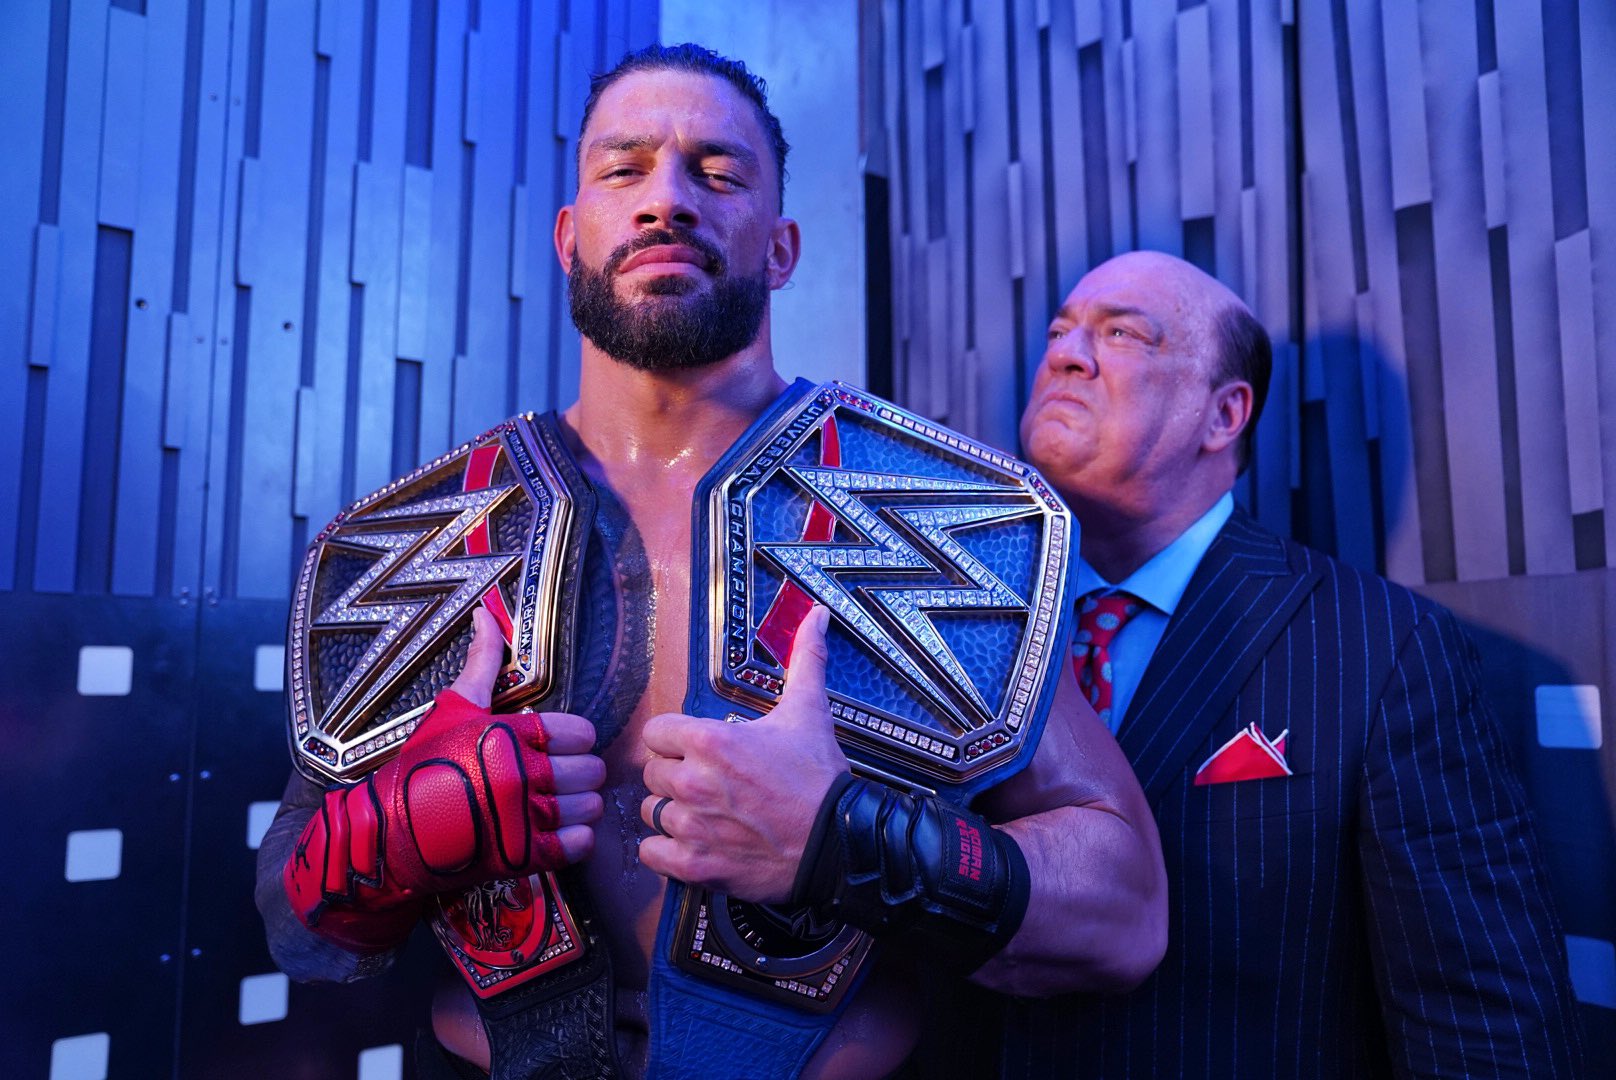 WWE would not end soon with the separation of Raw